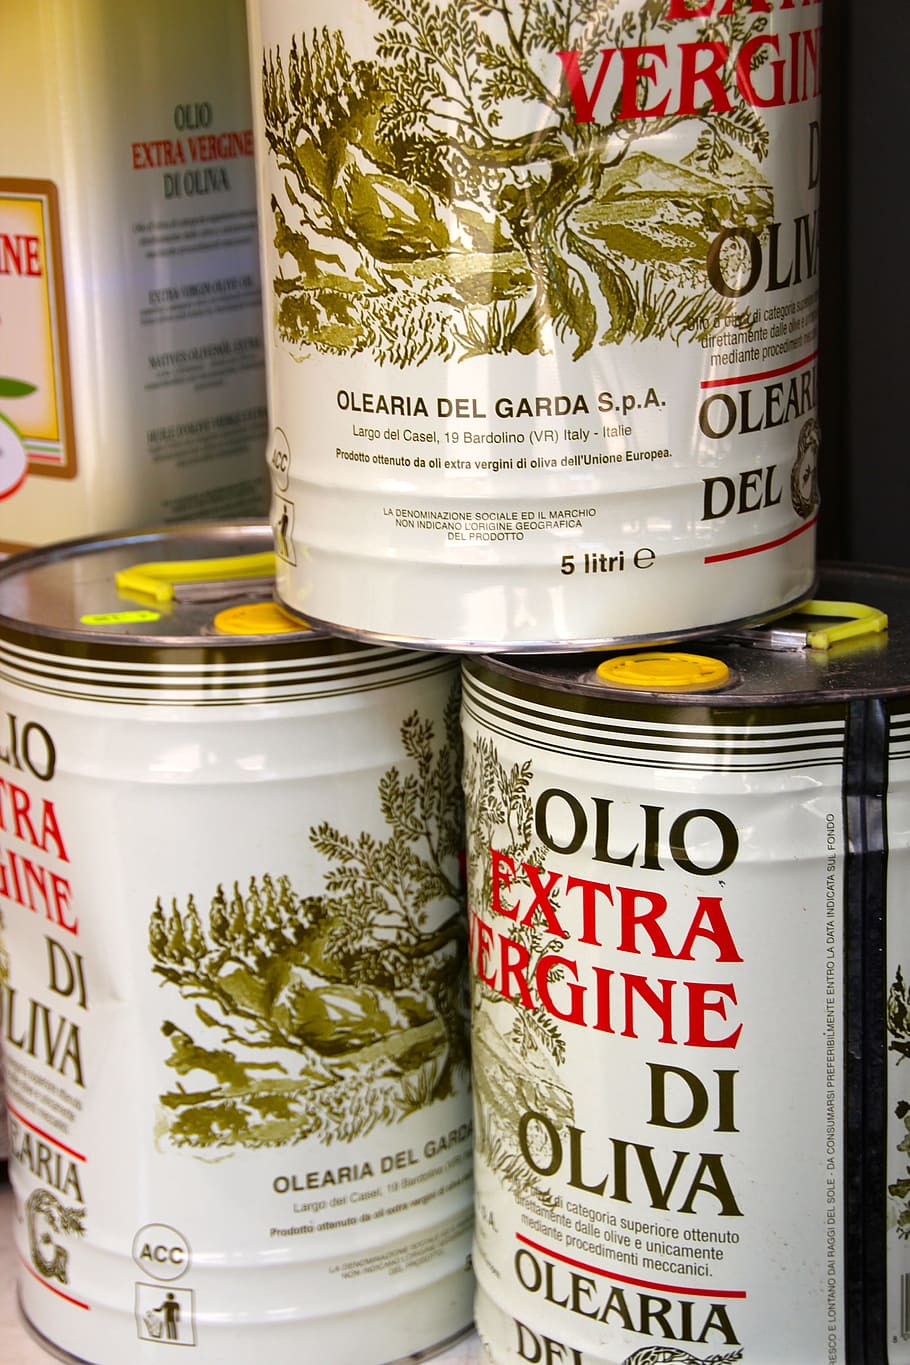 Olive Oil, Cans, Food, oil, olive, healthcare and medicine, can, close-up, food staple, communication